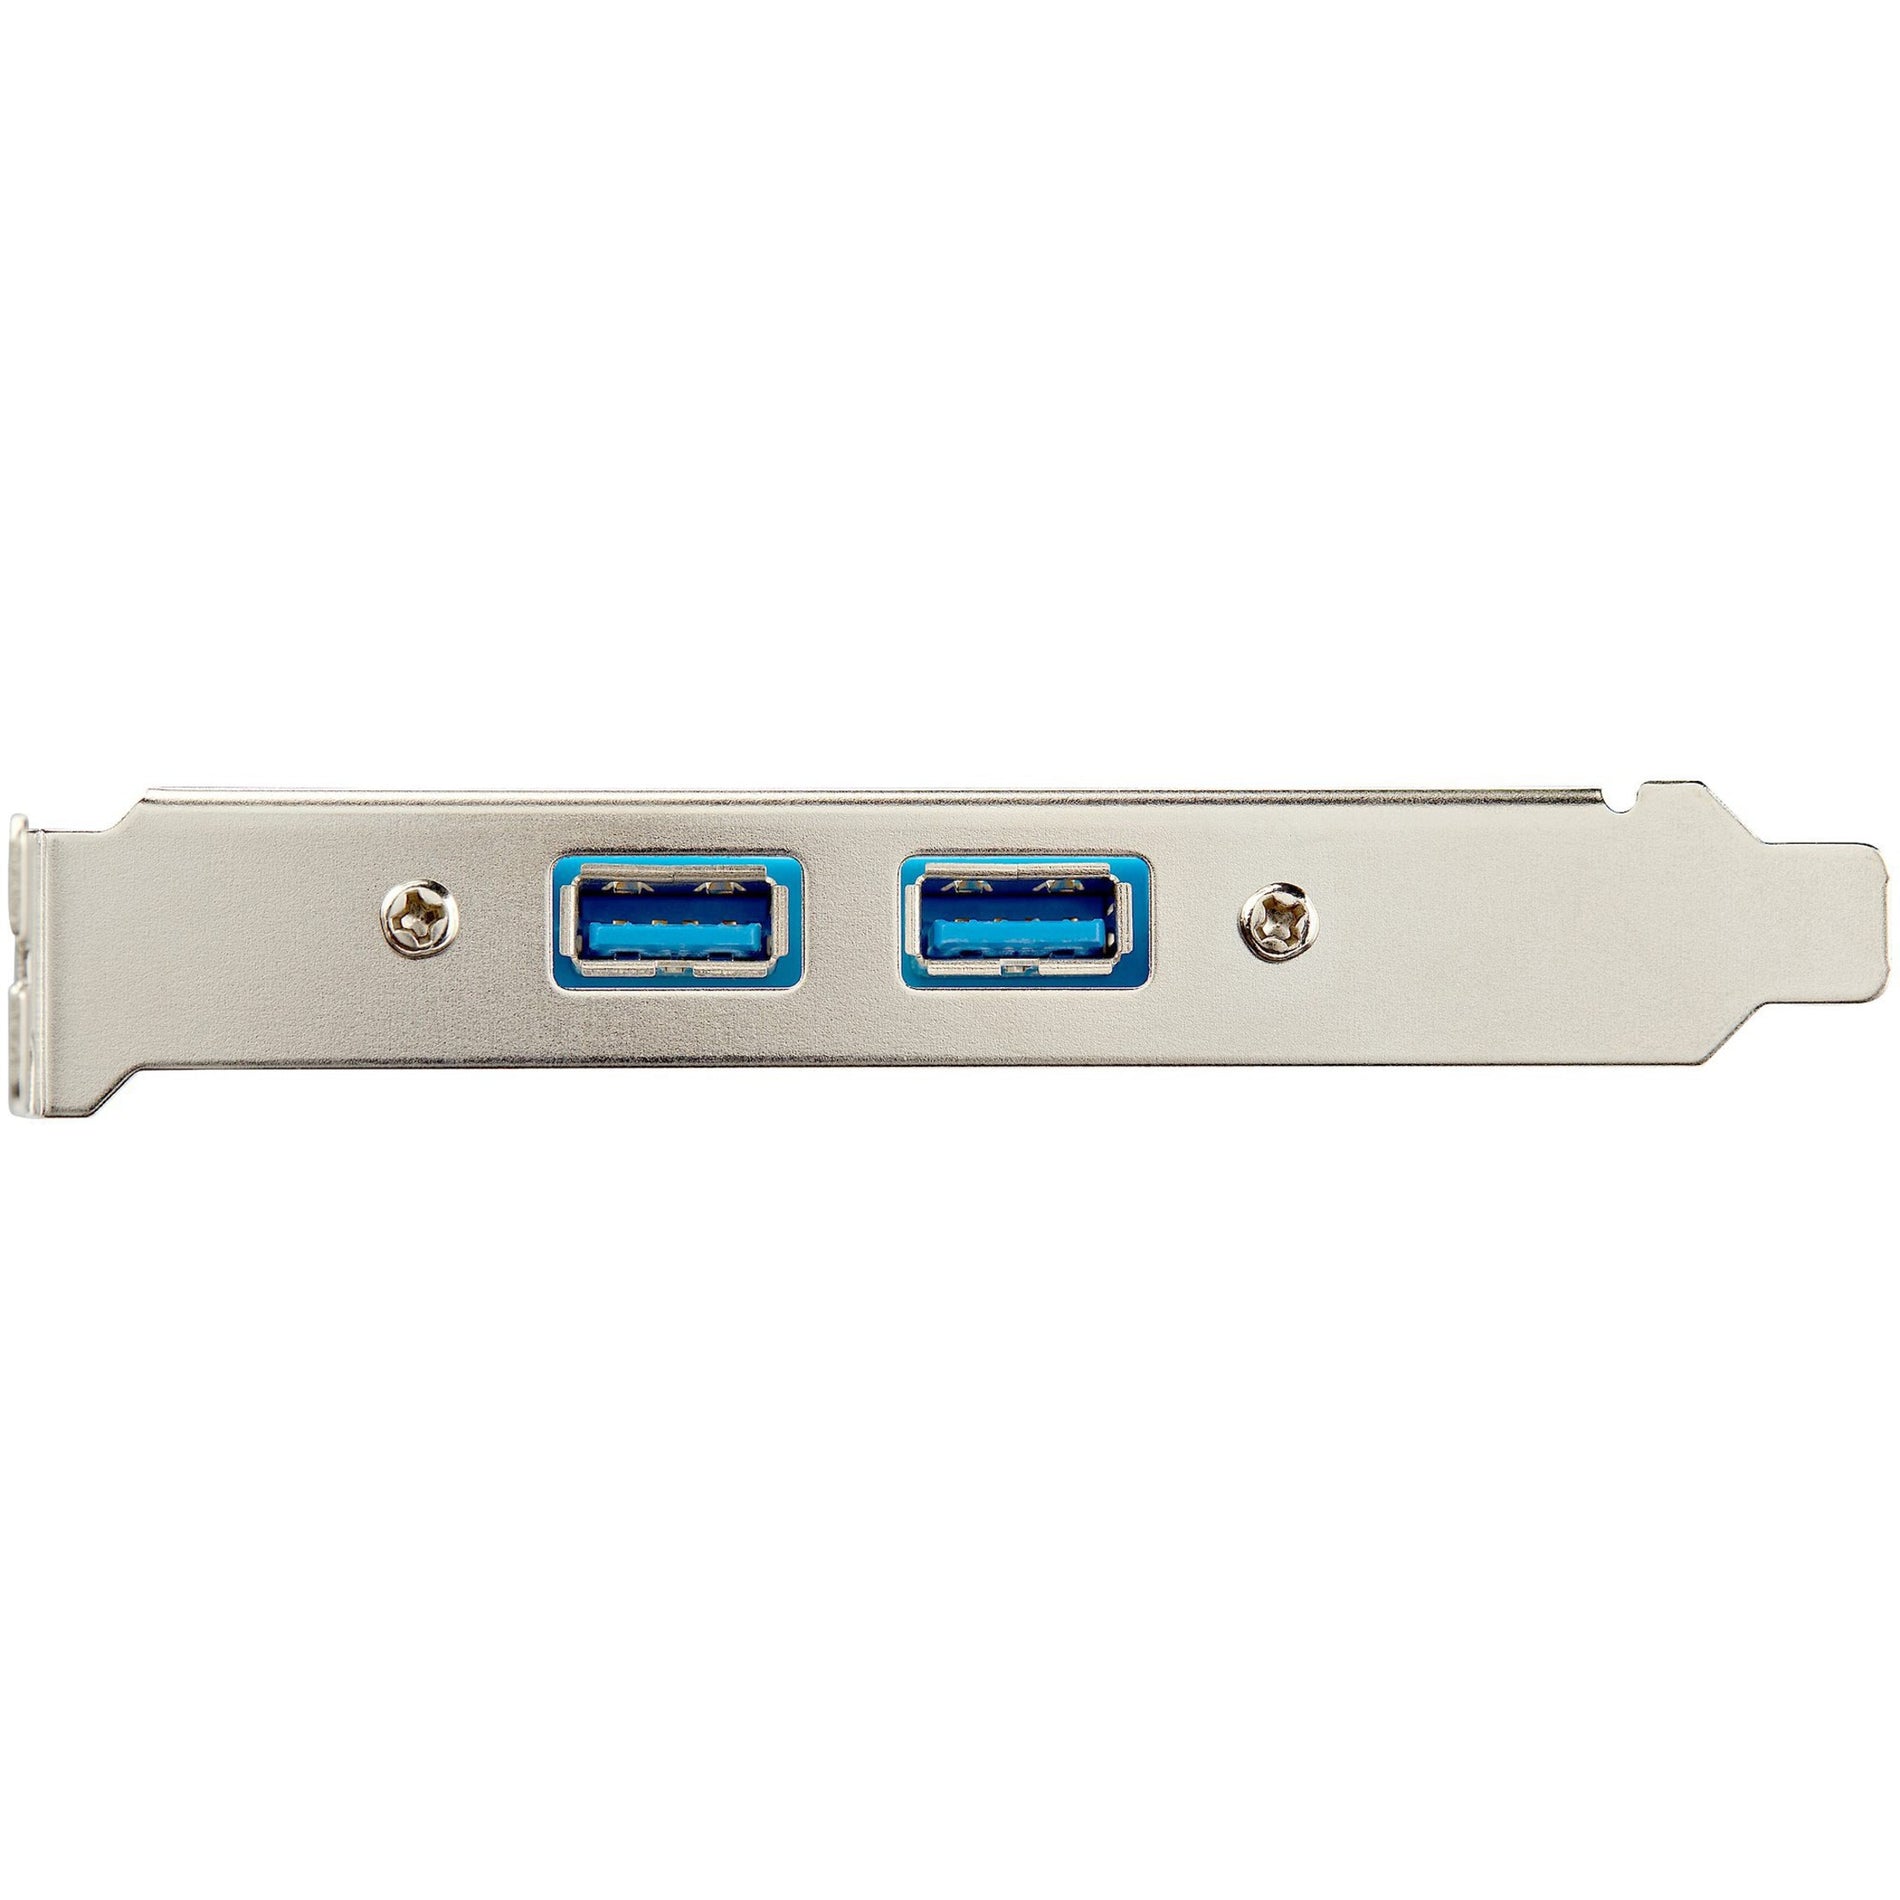 StarTech.com USB3SPLATE 2 Port USB 3.0 A Female Slot Plate Adapter, Easy Data Transfer and Expansion